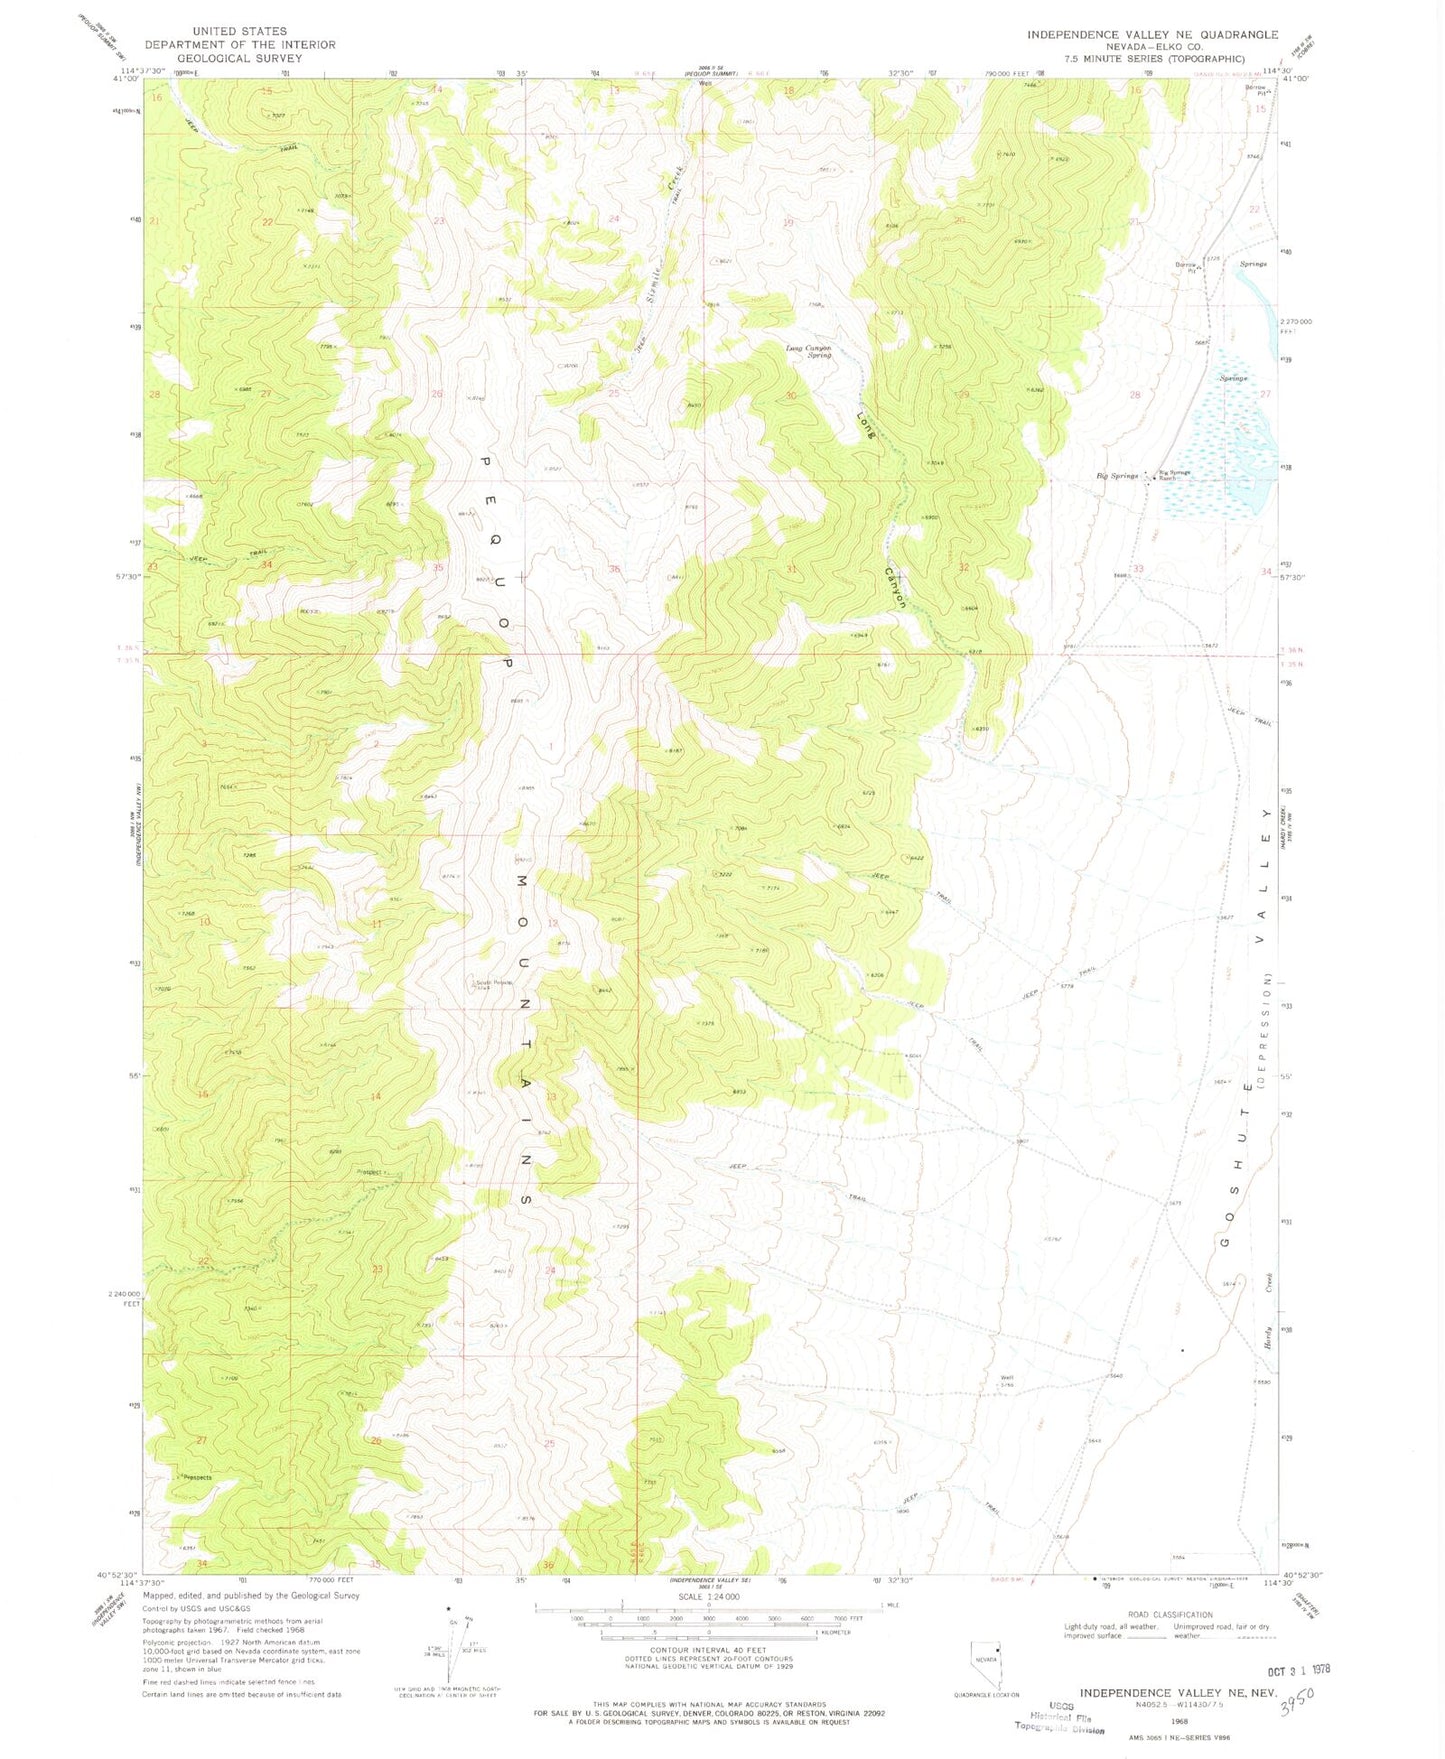 Classic USGS Independence Valley NE Nevada 7.5'x7.5' Topo Map Image